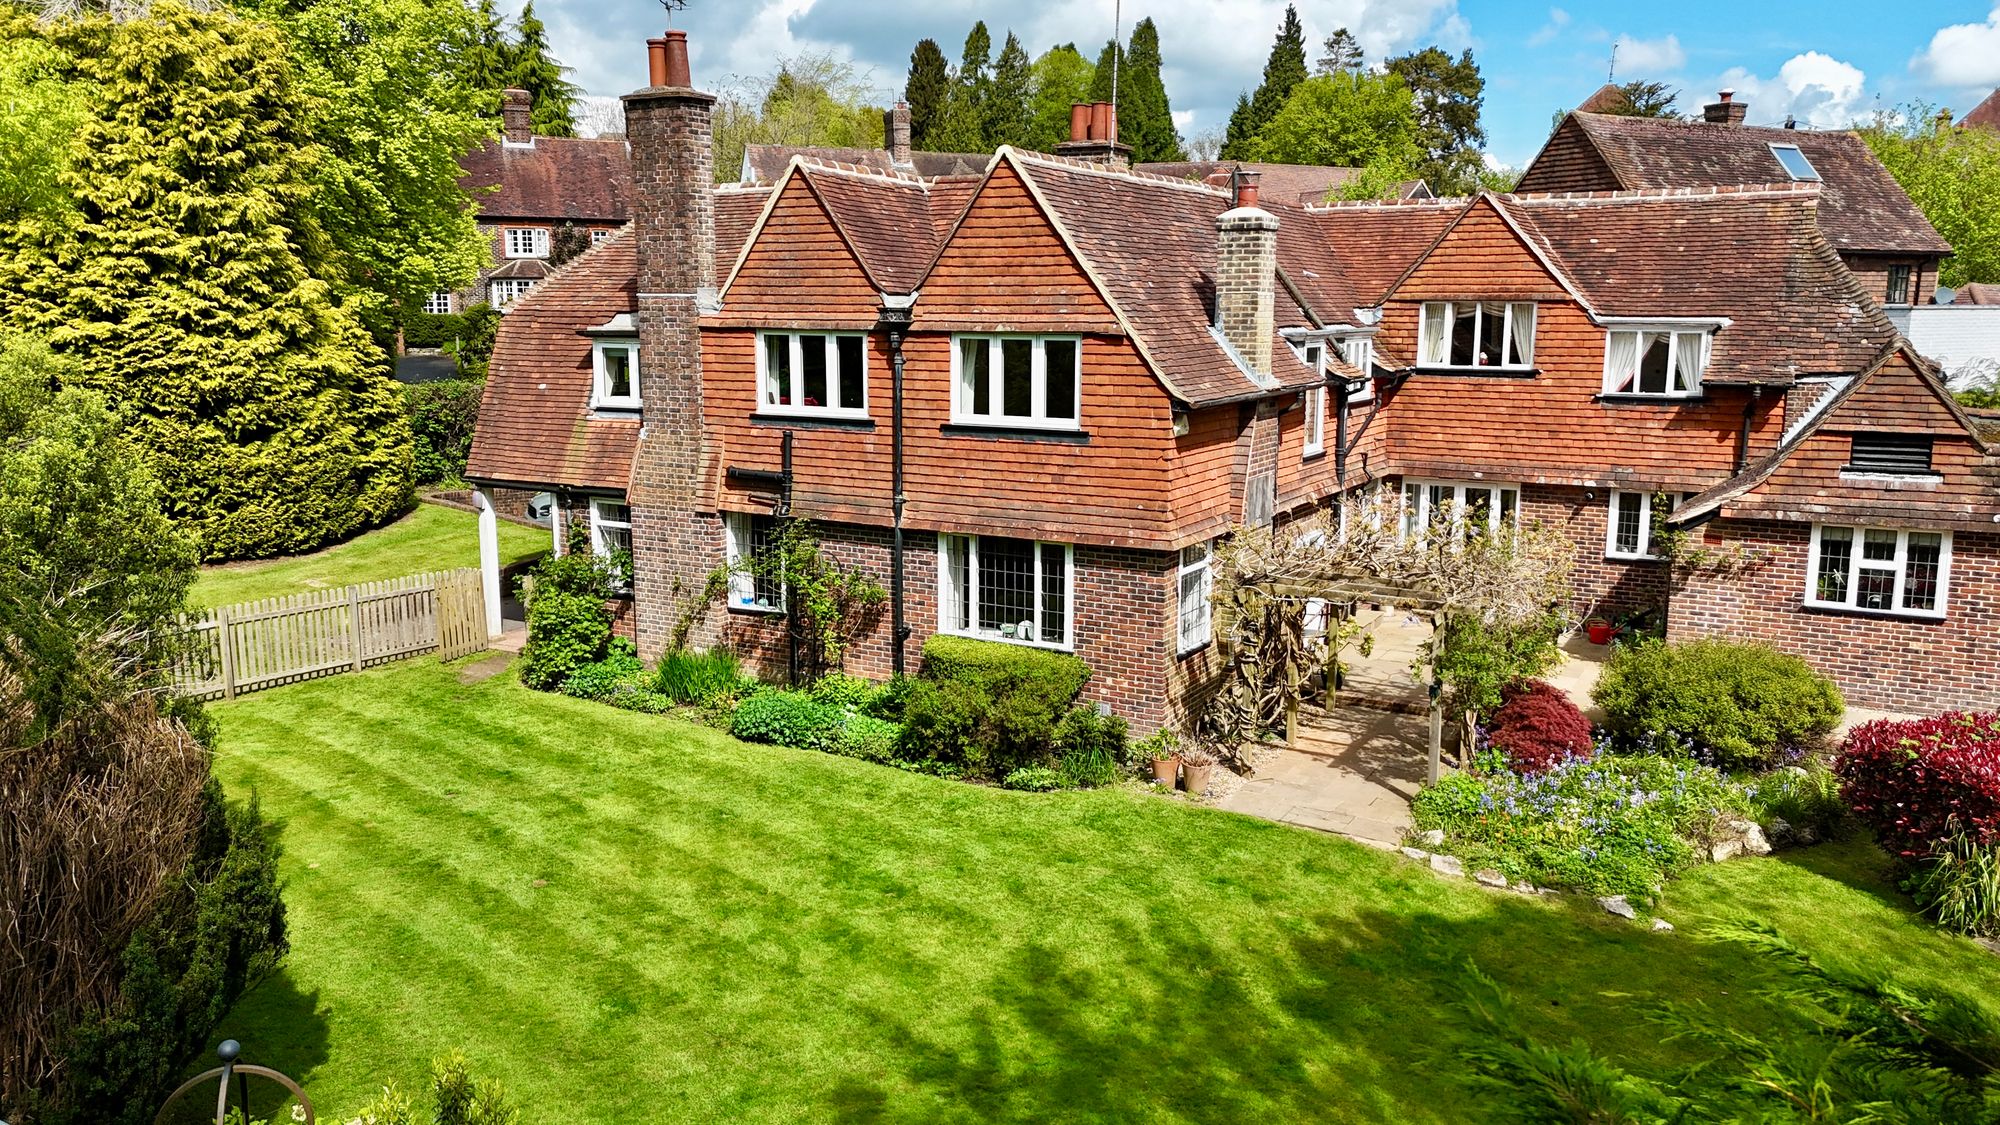 Tanners Lane, Haslemere, GU27